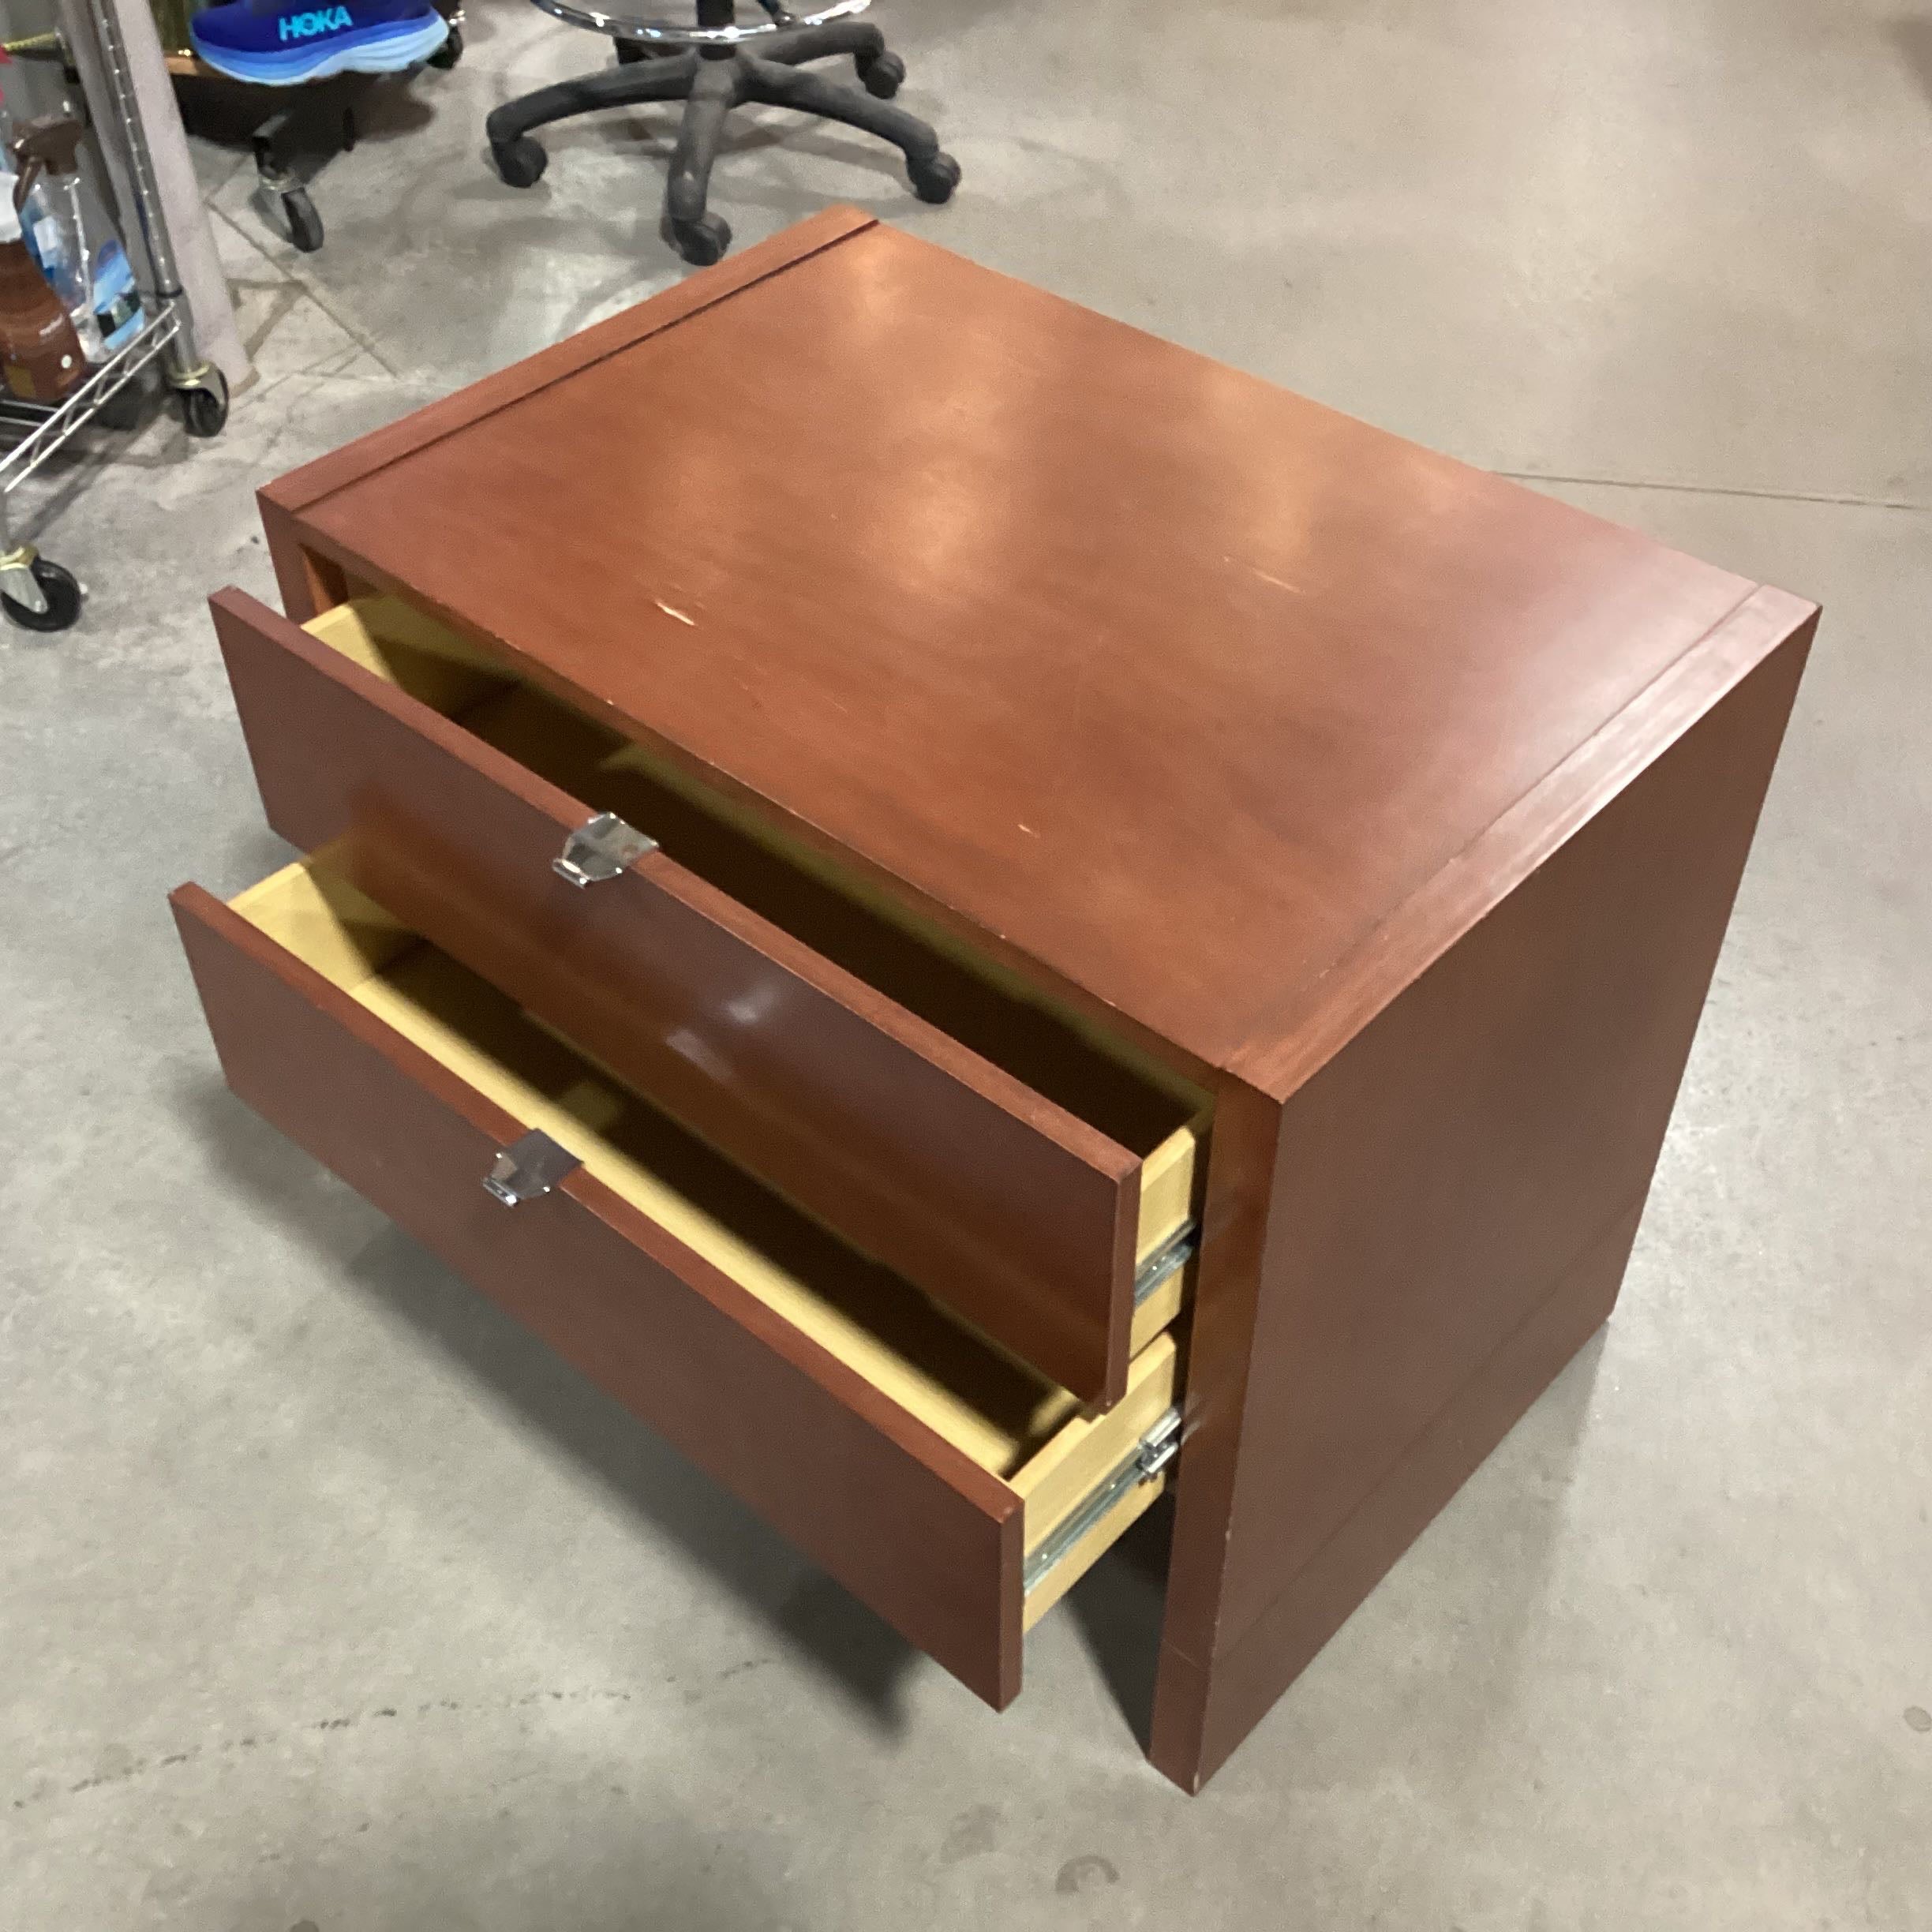 Red Brown Finish 2 Drawer Nightstand